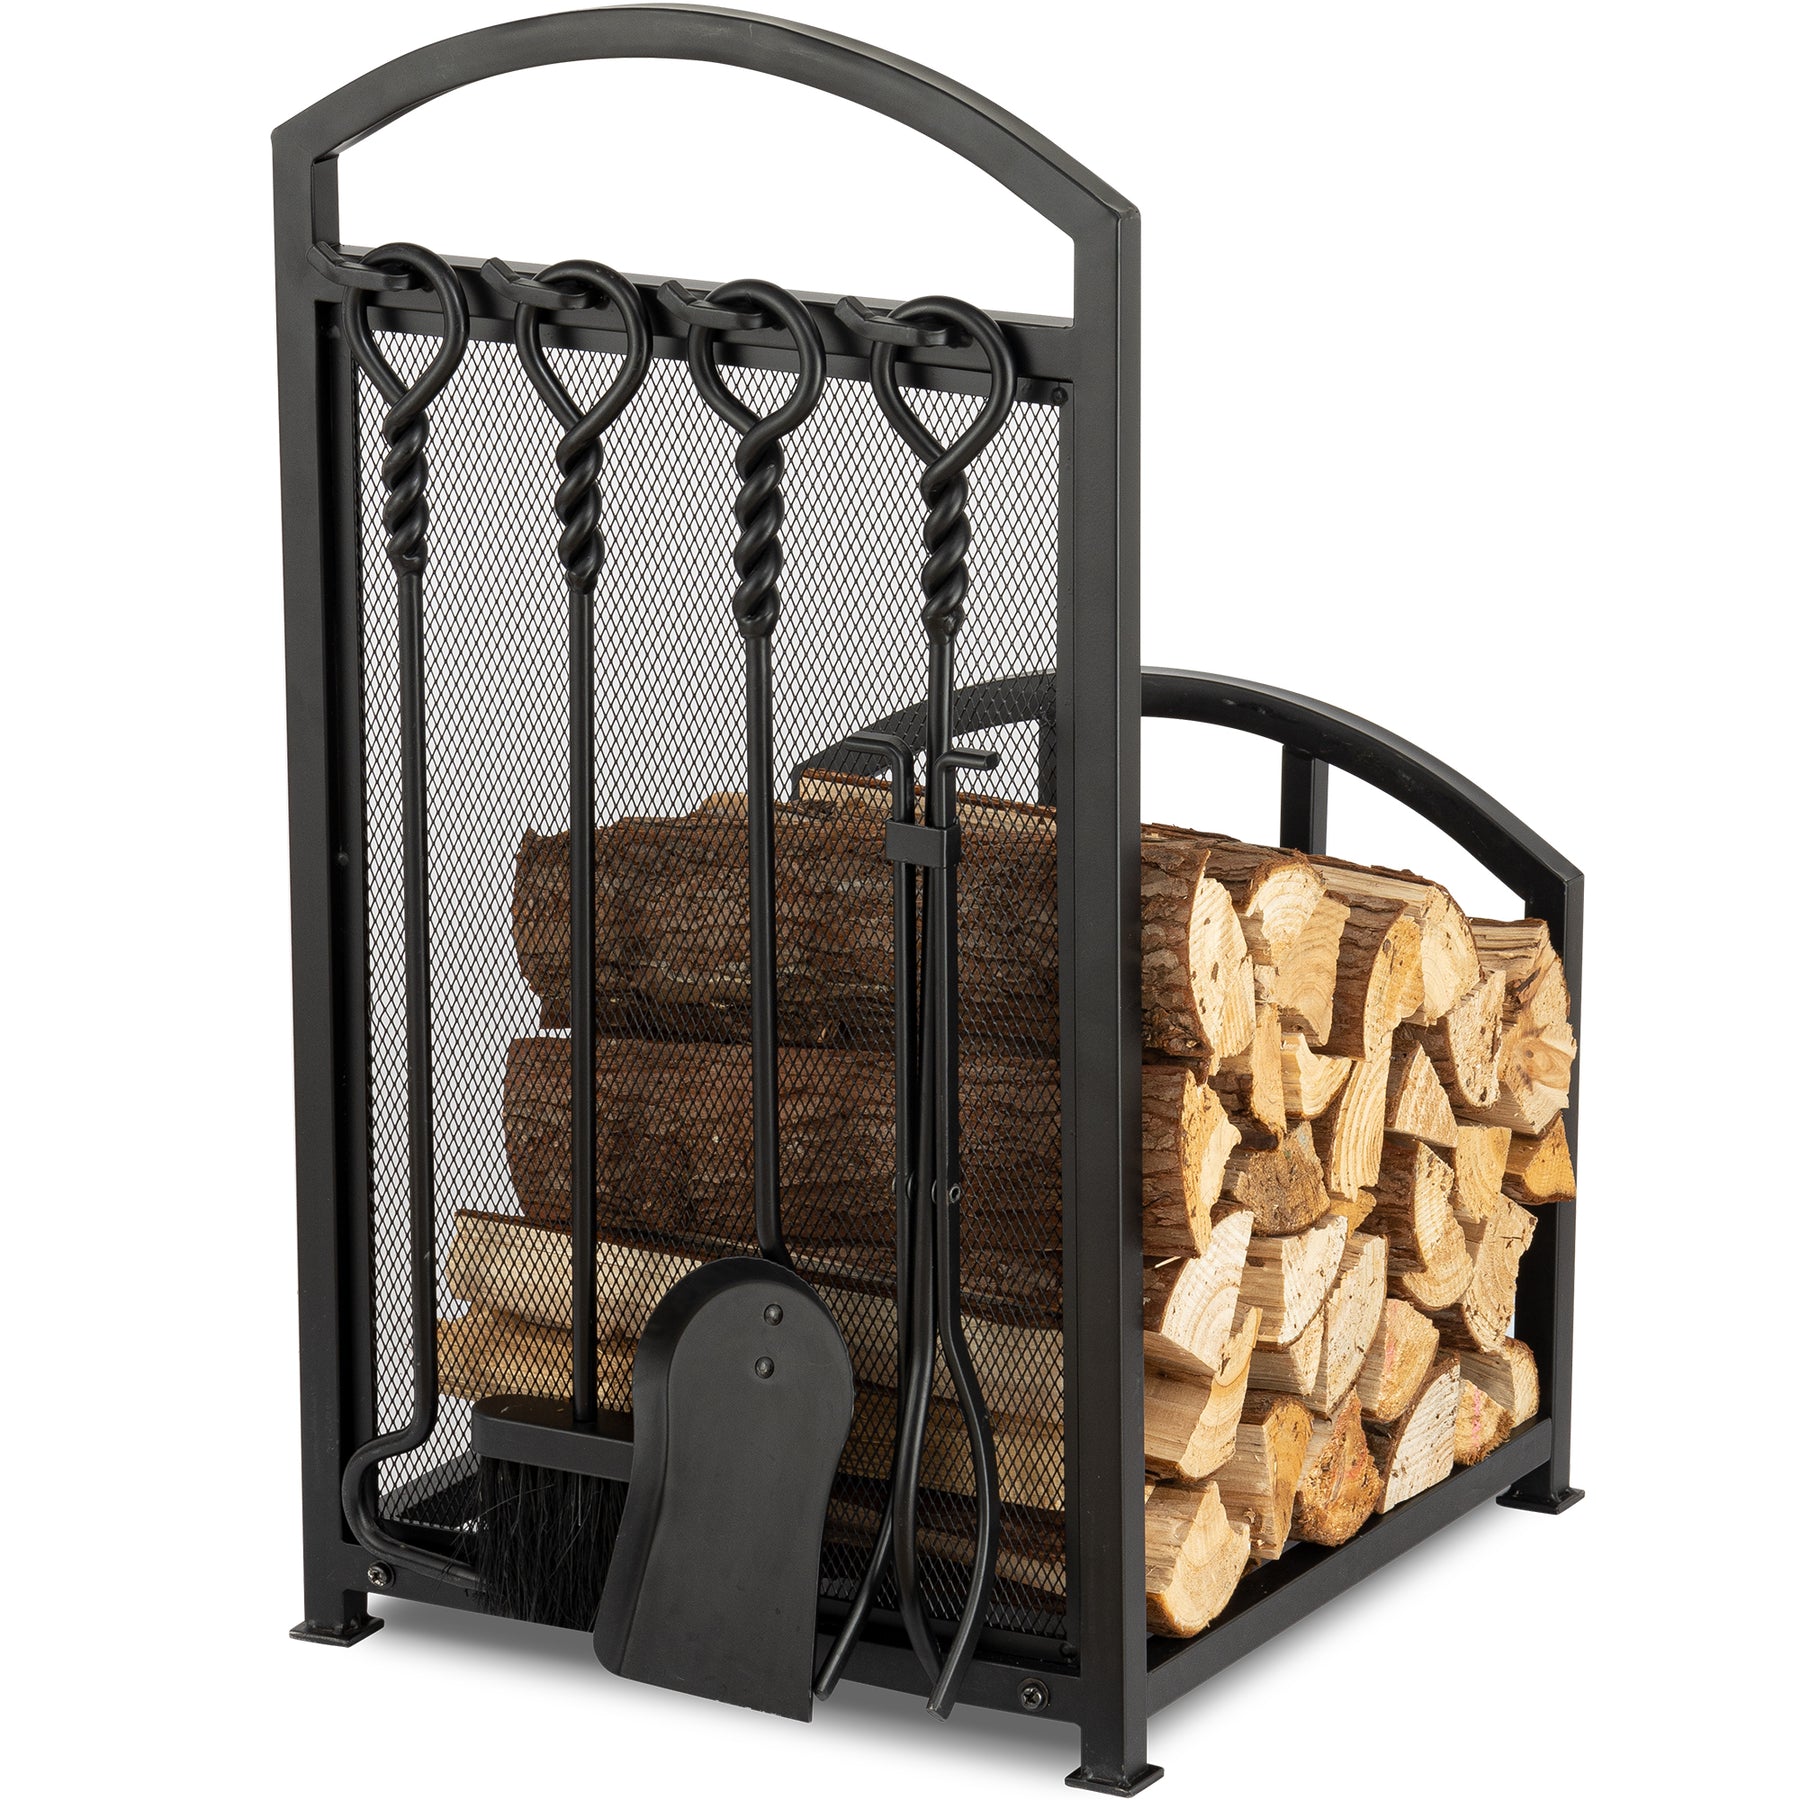  AMAGABELI GARDEN & HOME 8ft Outdoor Firewood Rack, Fireplace  Heavy Duty Firewood Pile Storage Racks For Patio Deck Metal Log Holder  Stand Tubular Steel Wood Stacker Outside Tools Accessories Black 